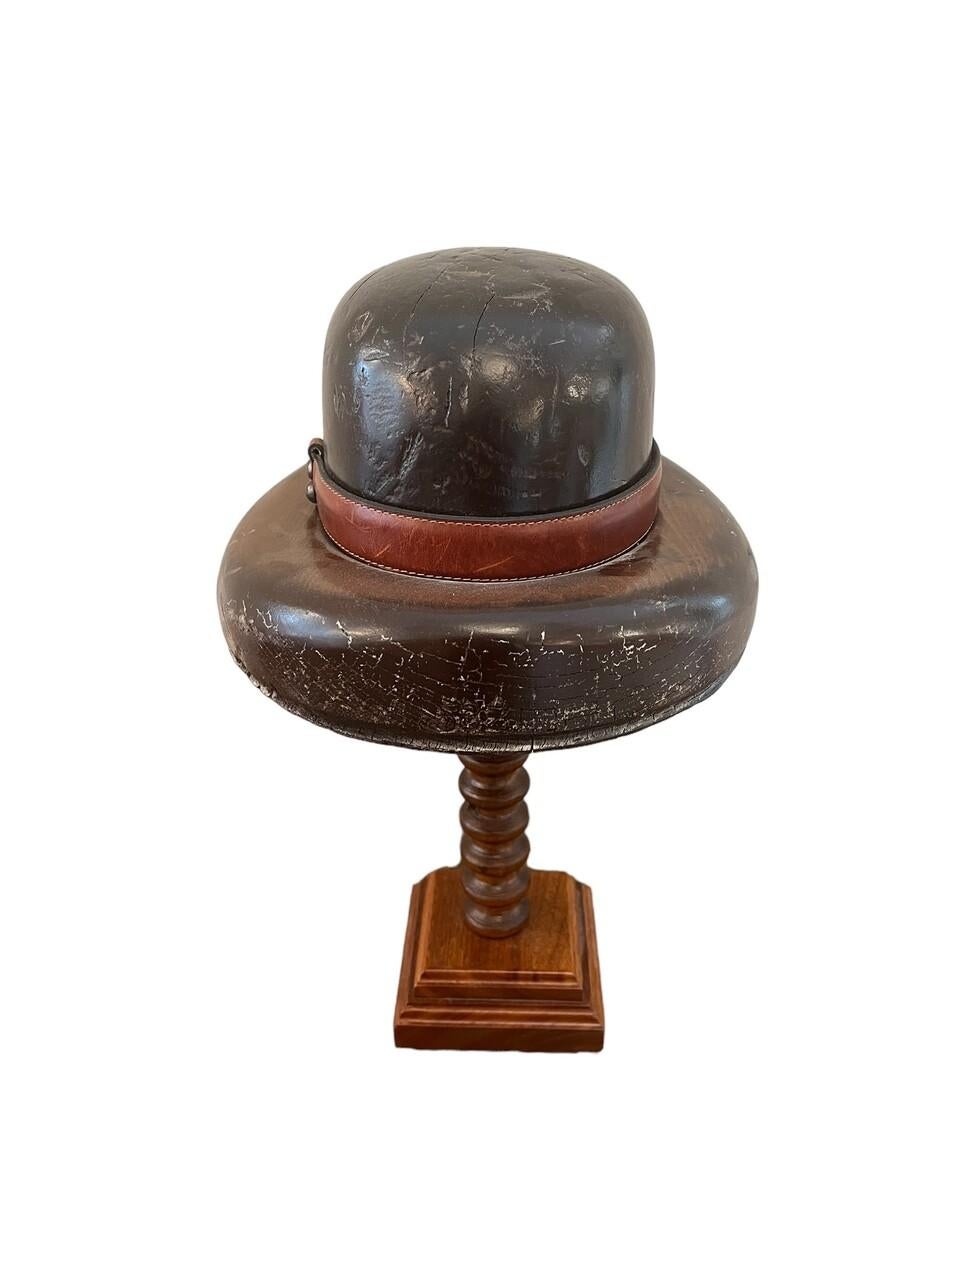 English wood hat mold on wood stand.
Men’s brimmed hat with leather and rope detail
circa 1910-1920